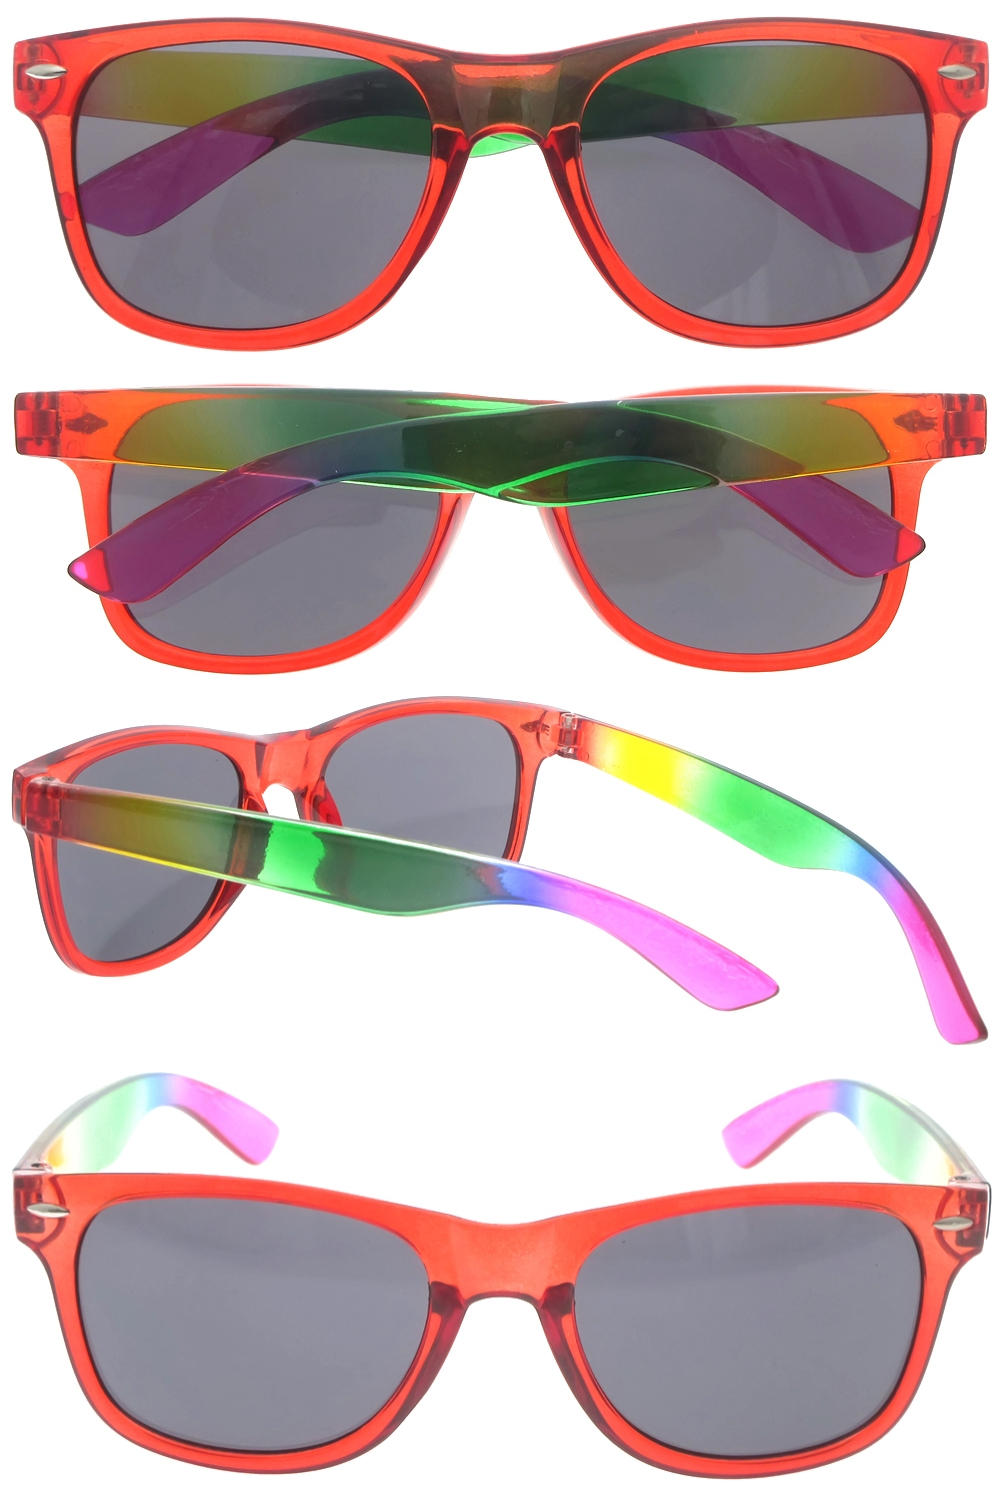 Dachuan Optical DSP348002 China Supplier Classic Design Plastic Sunglasses With Colorful Frame (2)